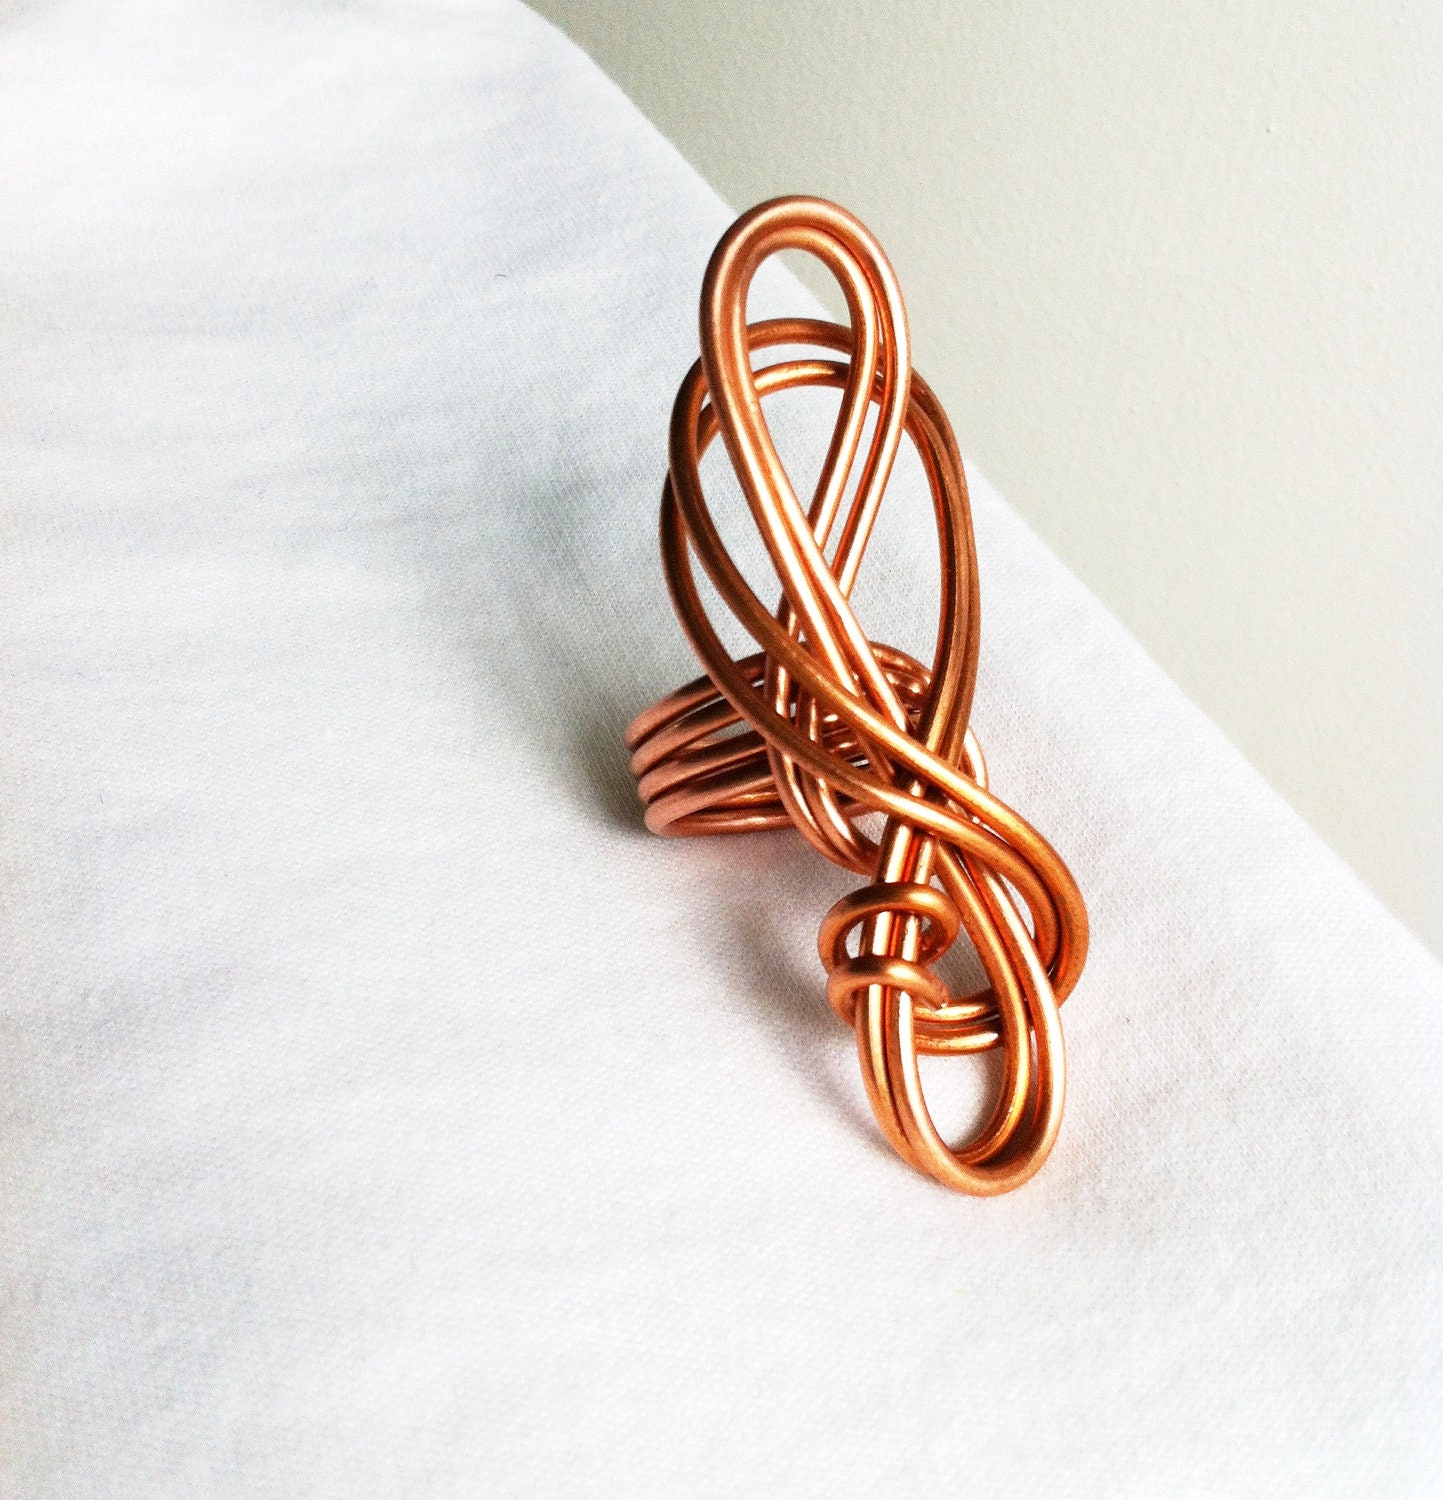 FORGET ME KNOT - Hand-formed Copper Ring